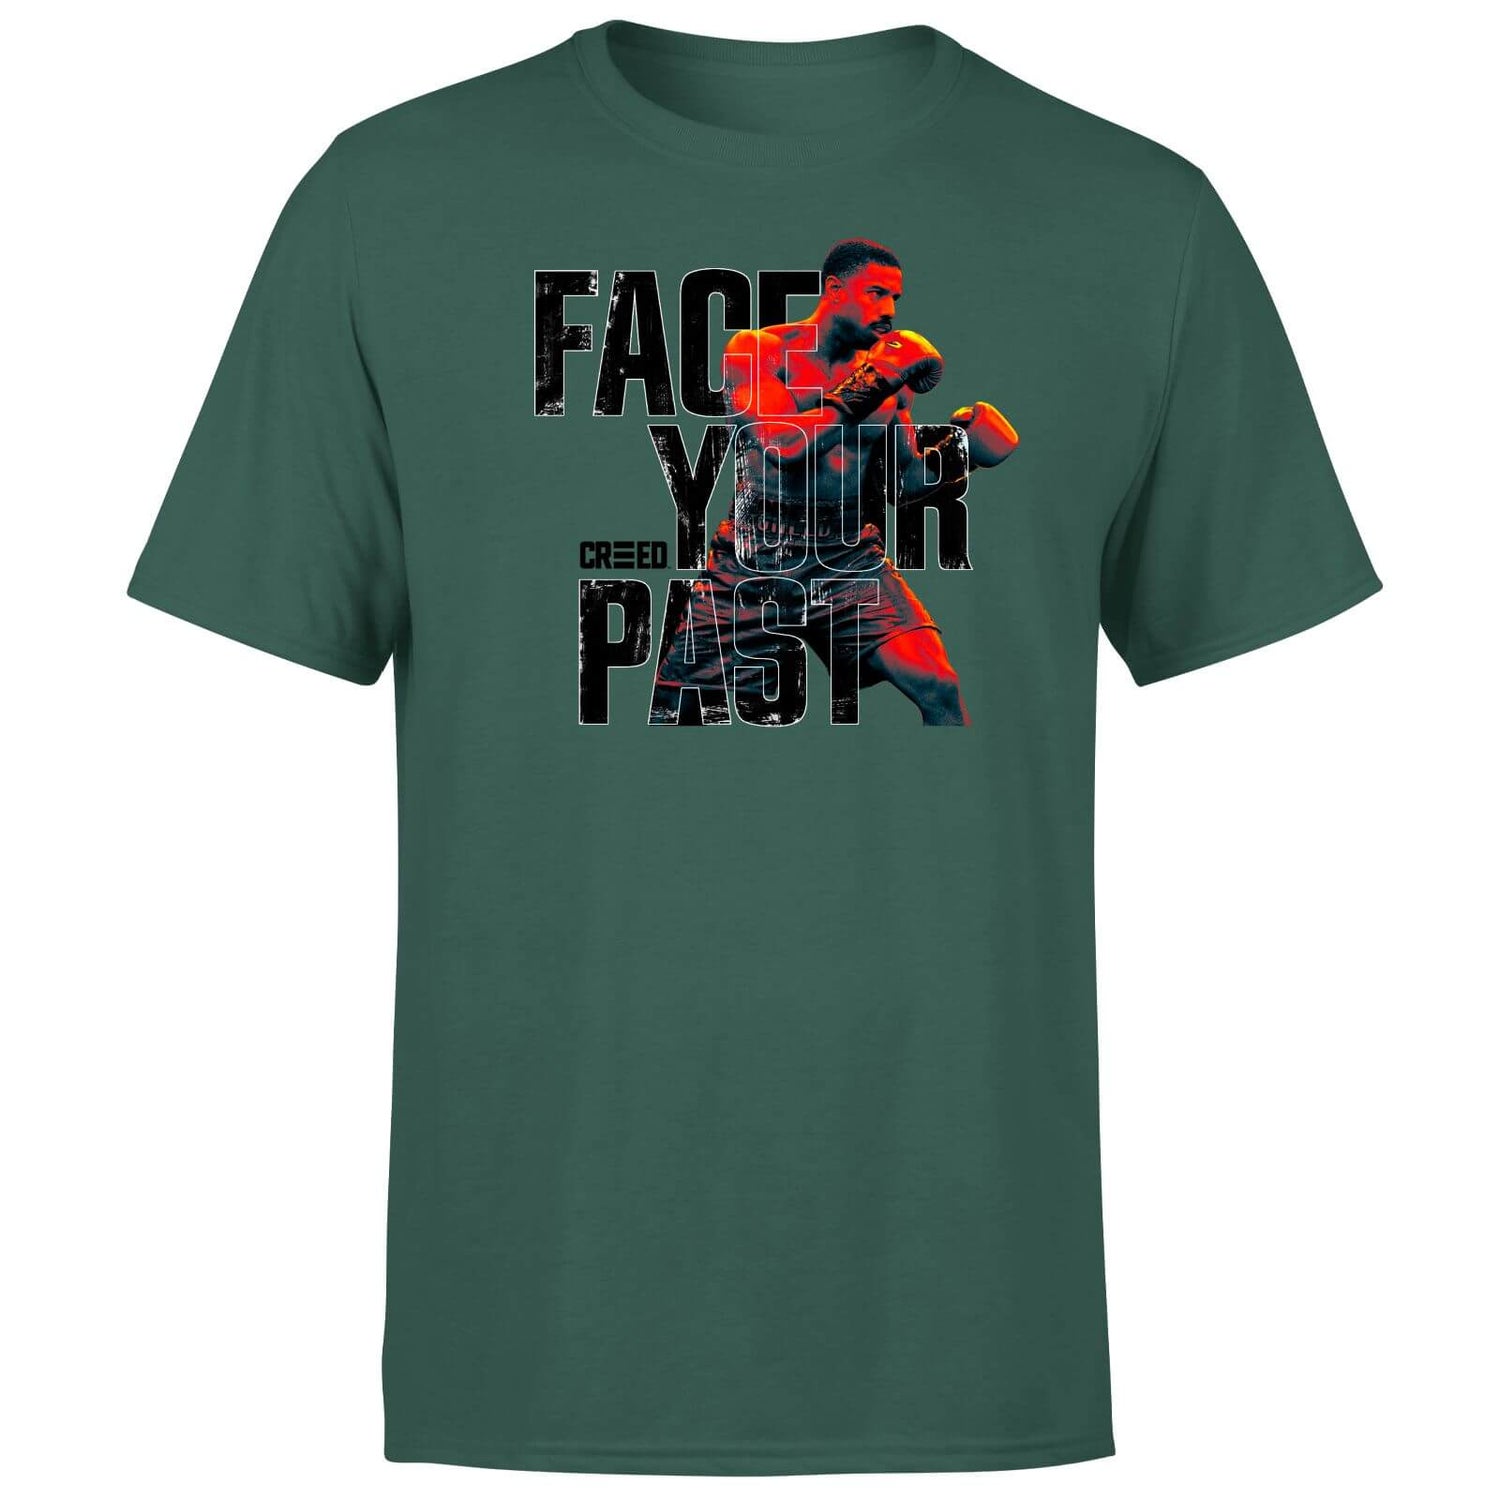 Creed Face Your Past Men's T-Shirt - Green - XS